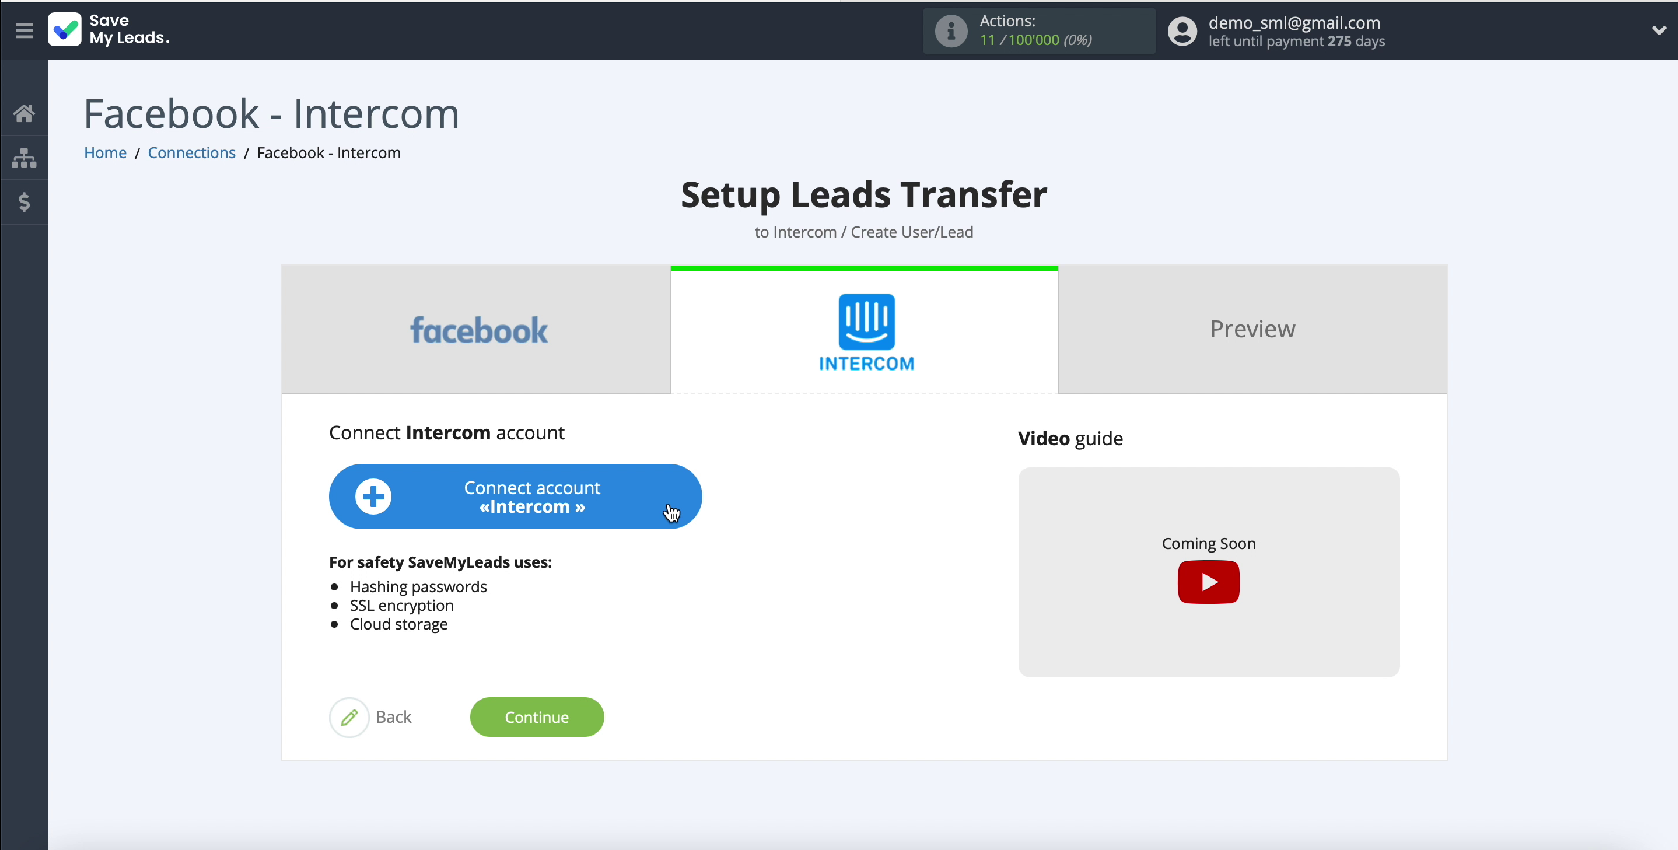 Connect your Intercom account to SaveMyLeads